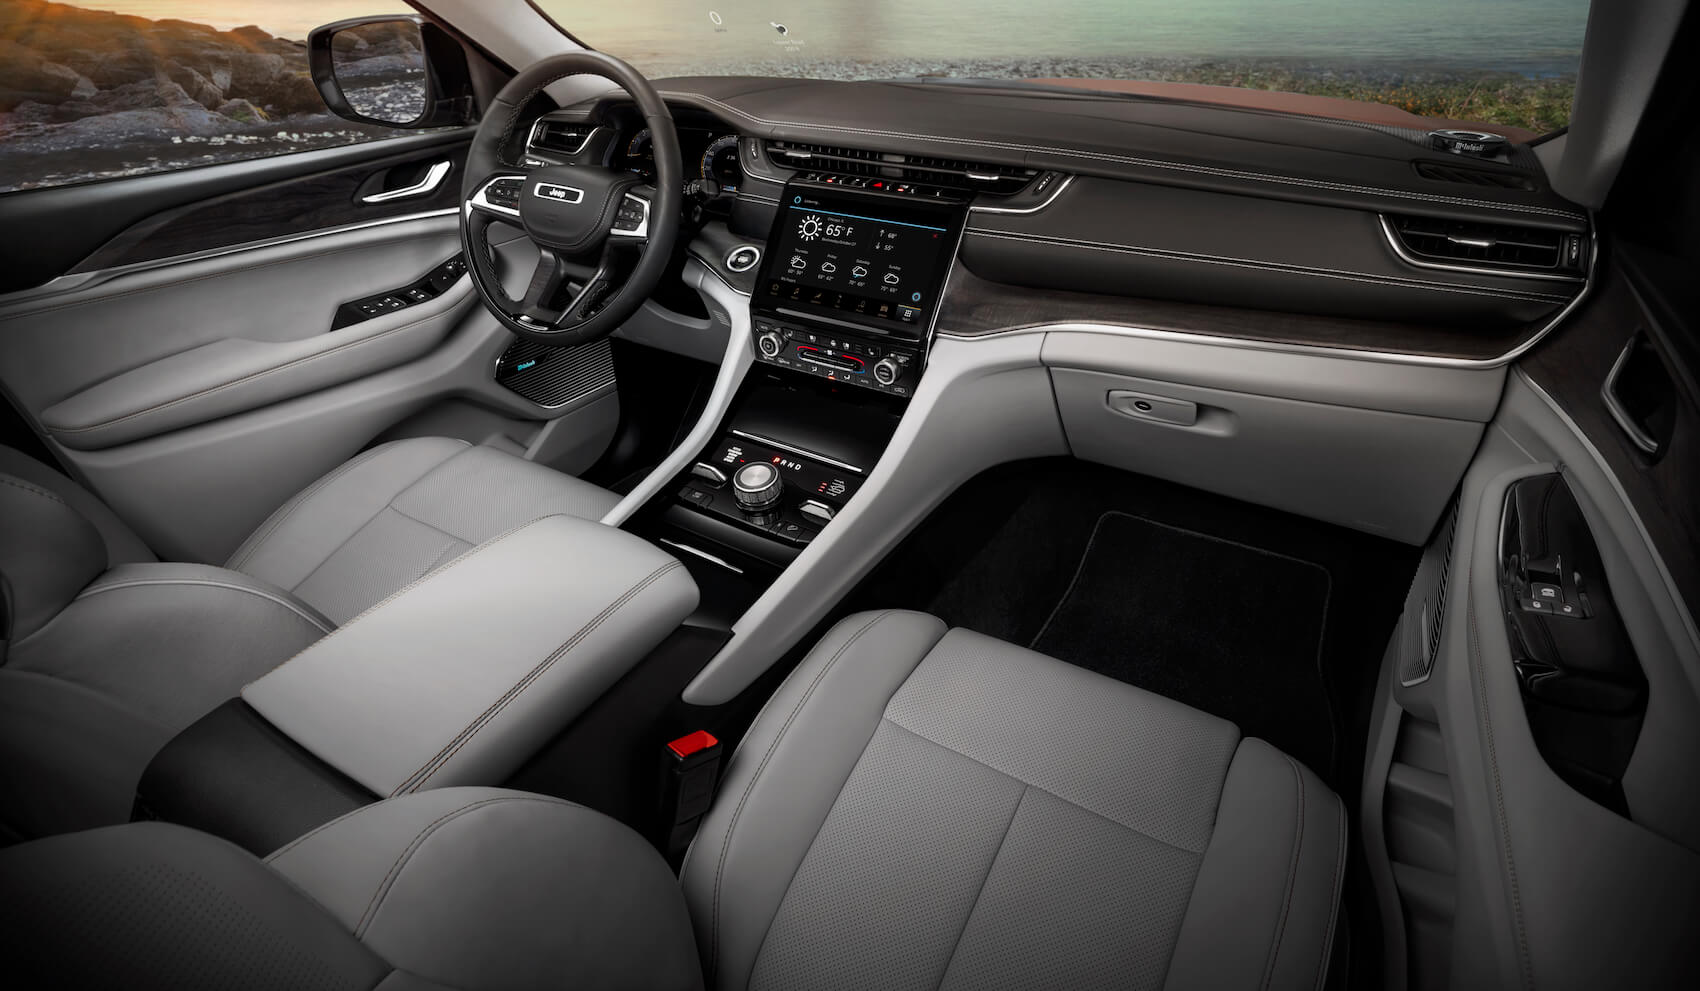 Jeep Grand Cherokee interior features